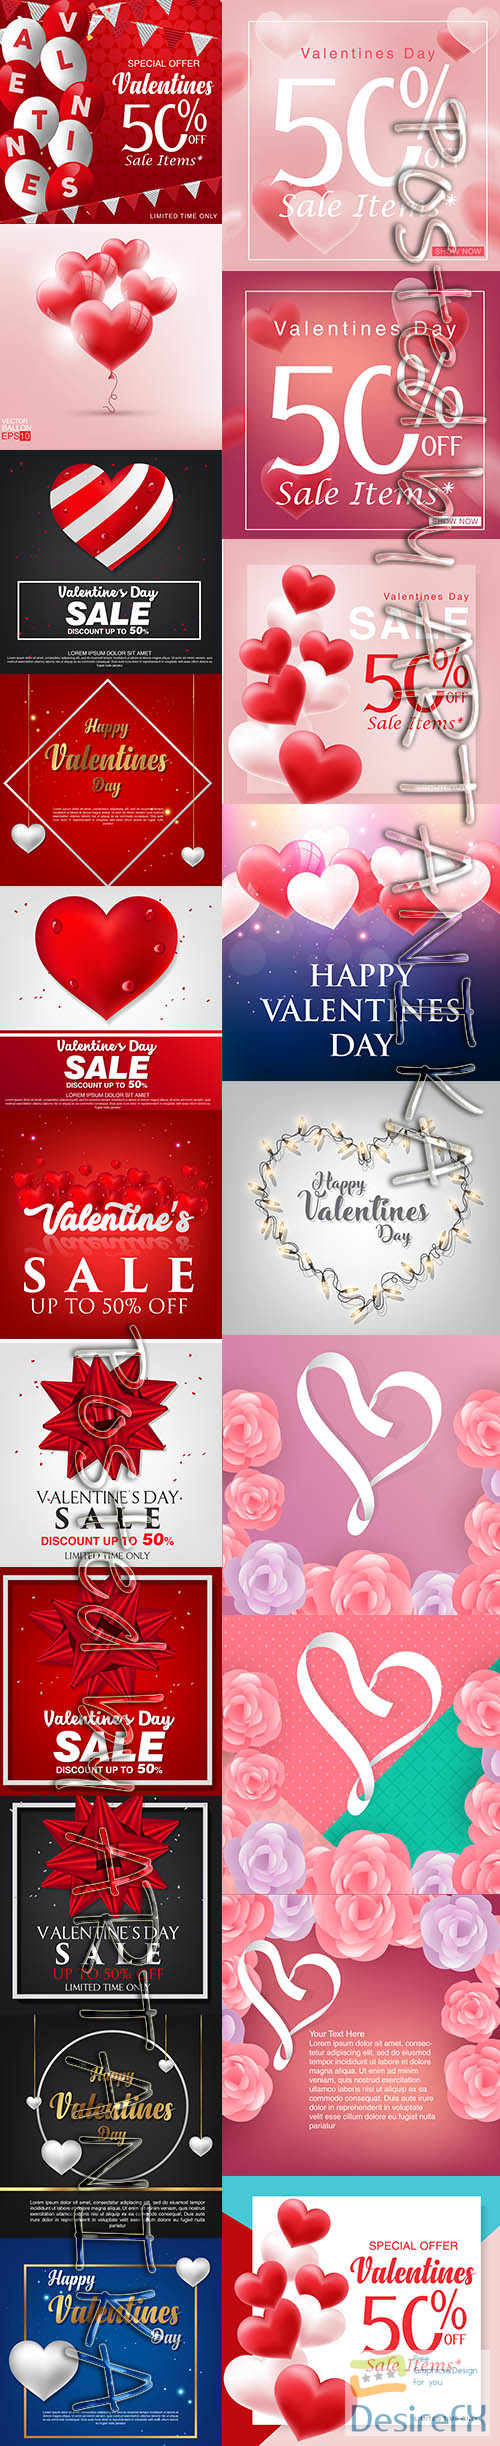 Collection of Happy Valentines Day Vector Illustrations Vol 2